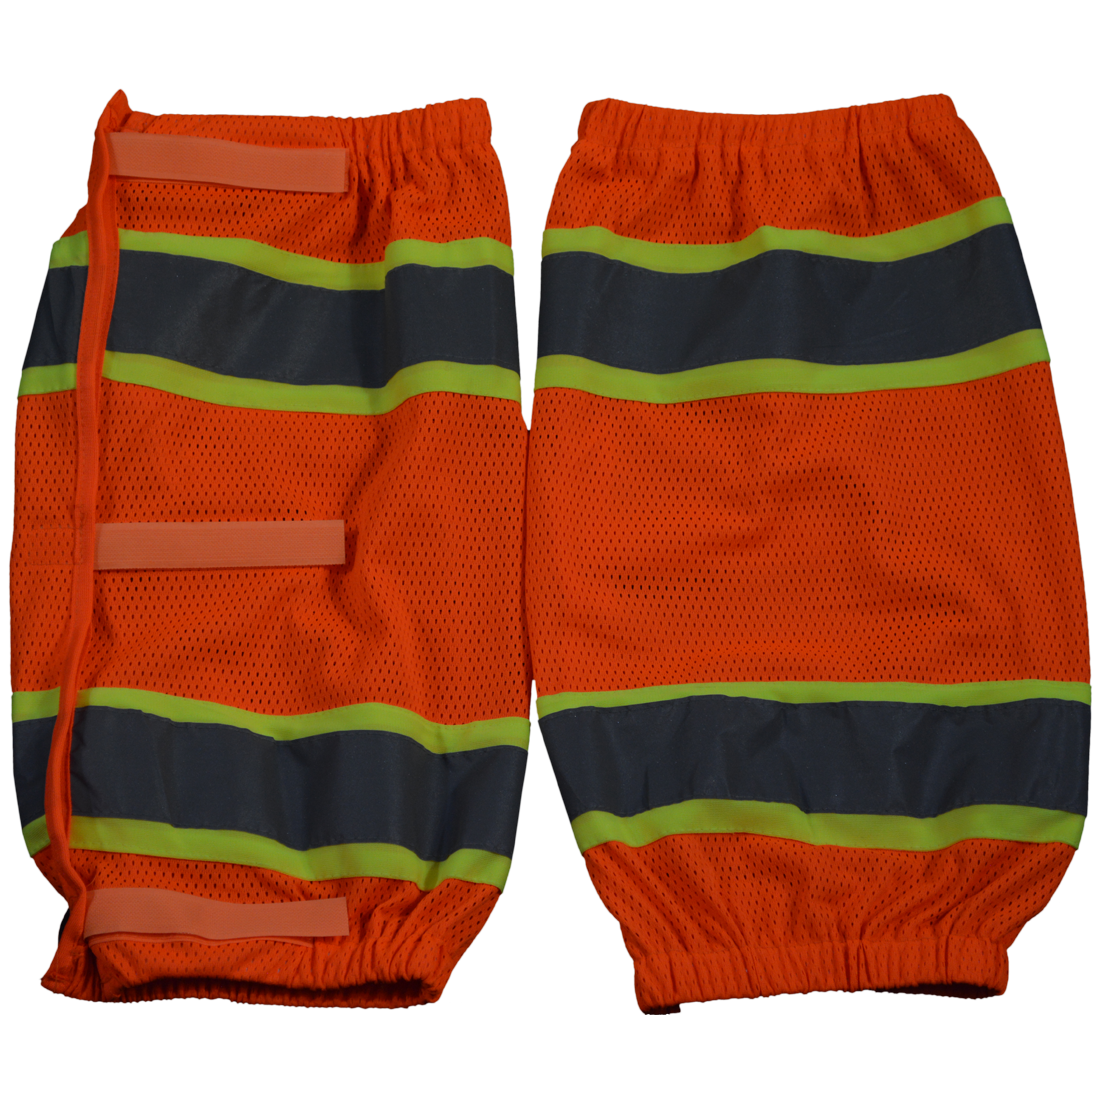 Picture of Petra Roc OMGL-CE 2 x 18 in. ANSI Class E Orange Mesh & Lime Contrast Reflective Leggings with Adjustable cloth hook and eye Closures&#44; One Size